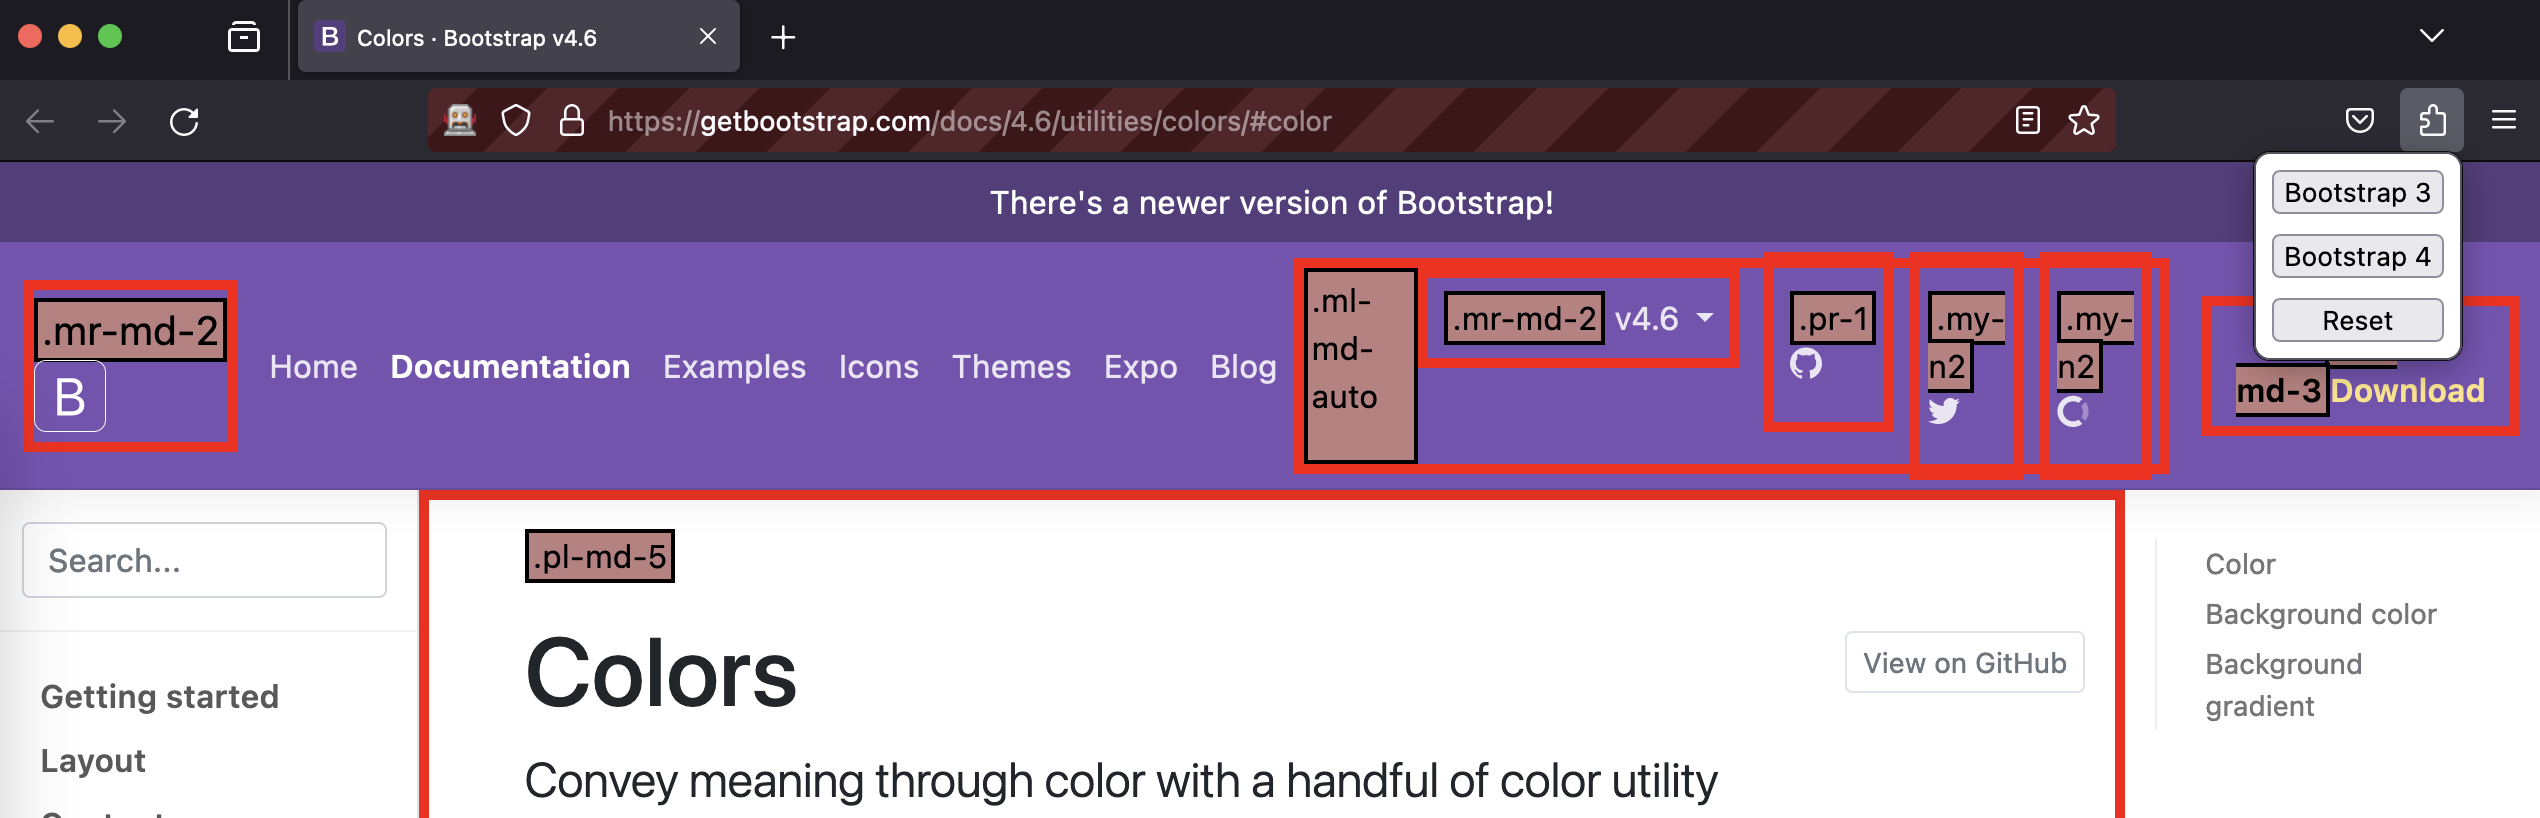 bootstrap-deprecated-classes-extension.png